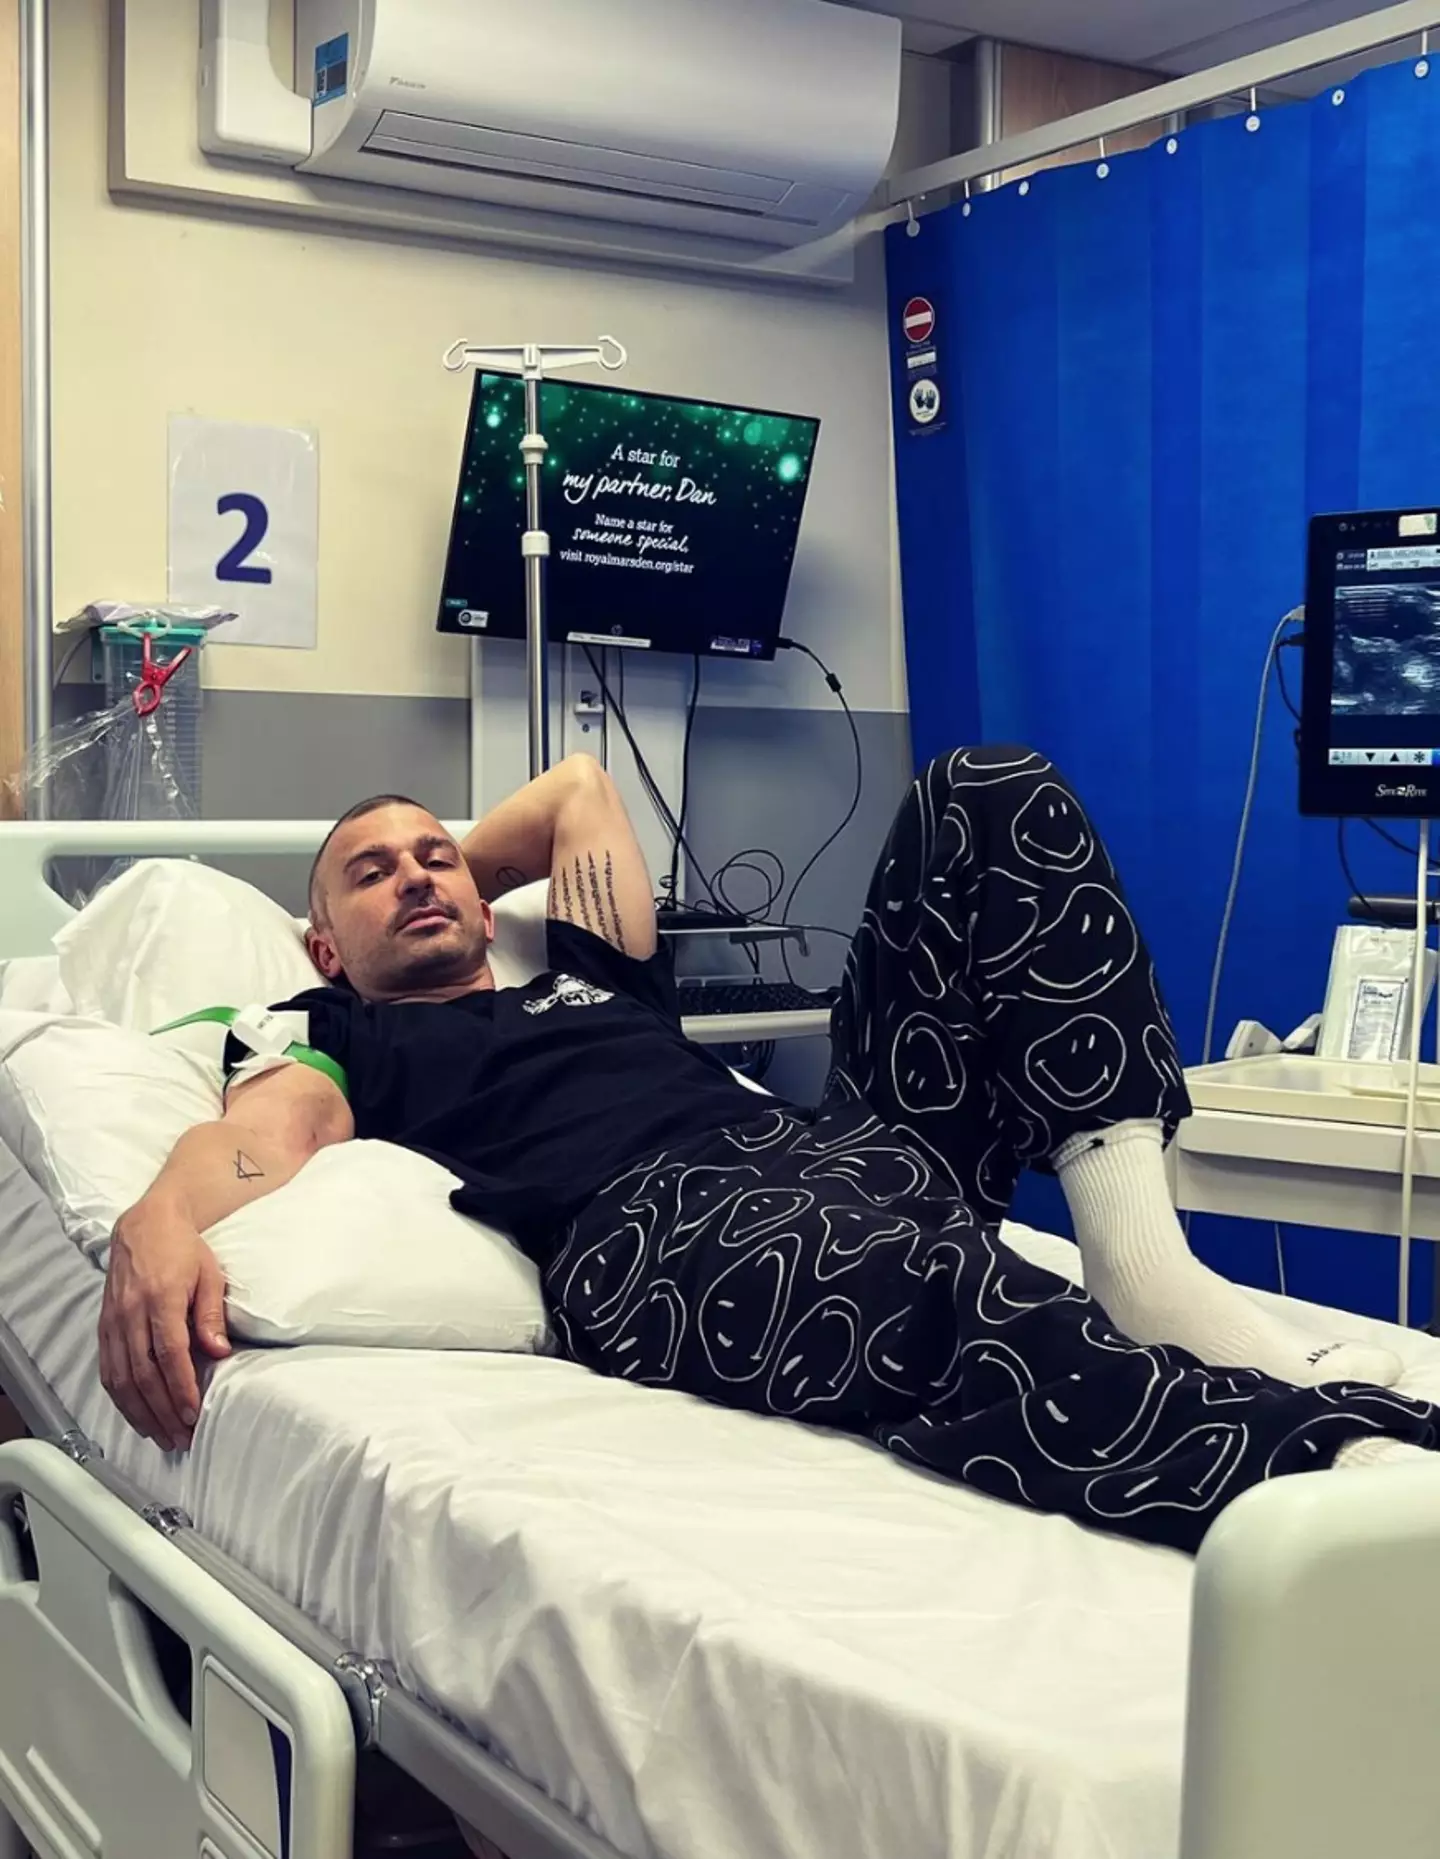 DJ Michael Bibi has updated fans on his health as he returns to hospital for treatment.